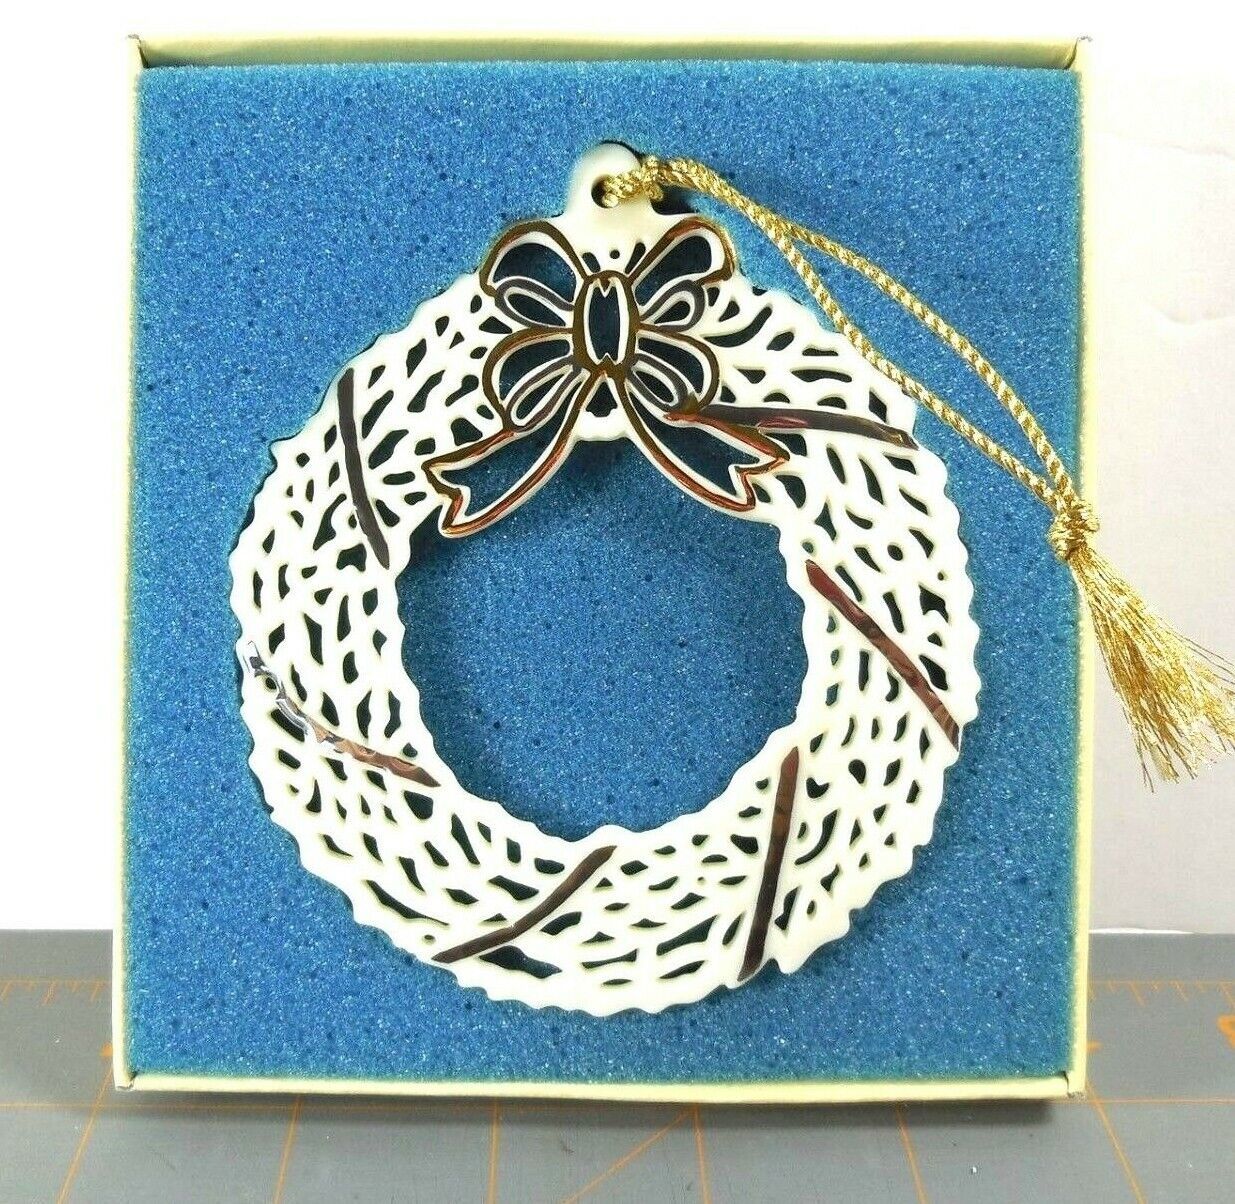 Mikasa Porcelain White Gold Wreath Christmas Tree Ornament Holiday Happiness - $16.00